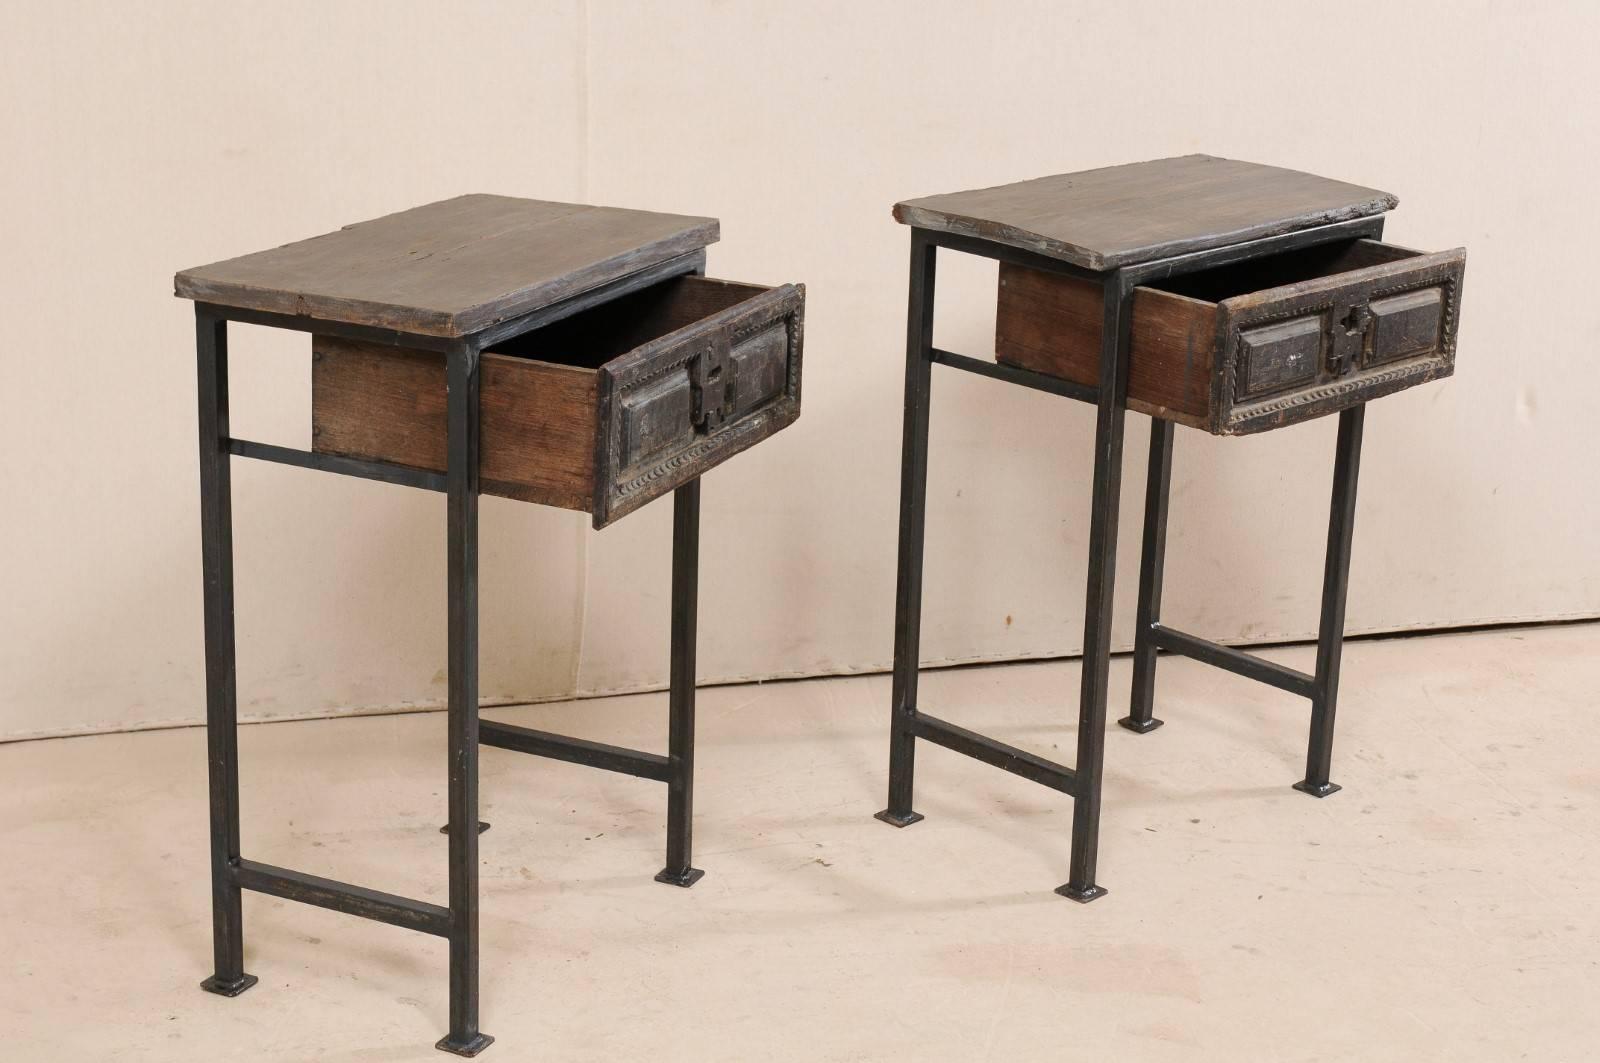 Rustic Pair of Spanish 18th Century Single Drawer Wood Side Tables on Iron Legs